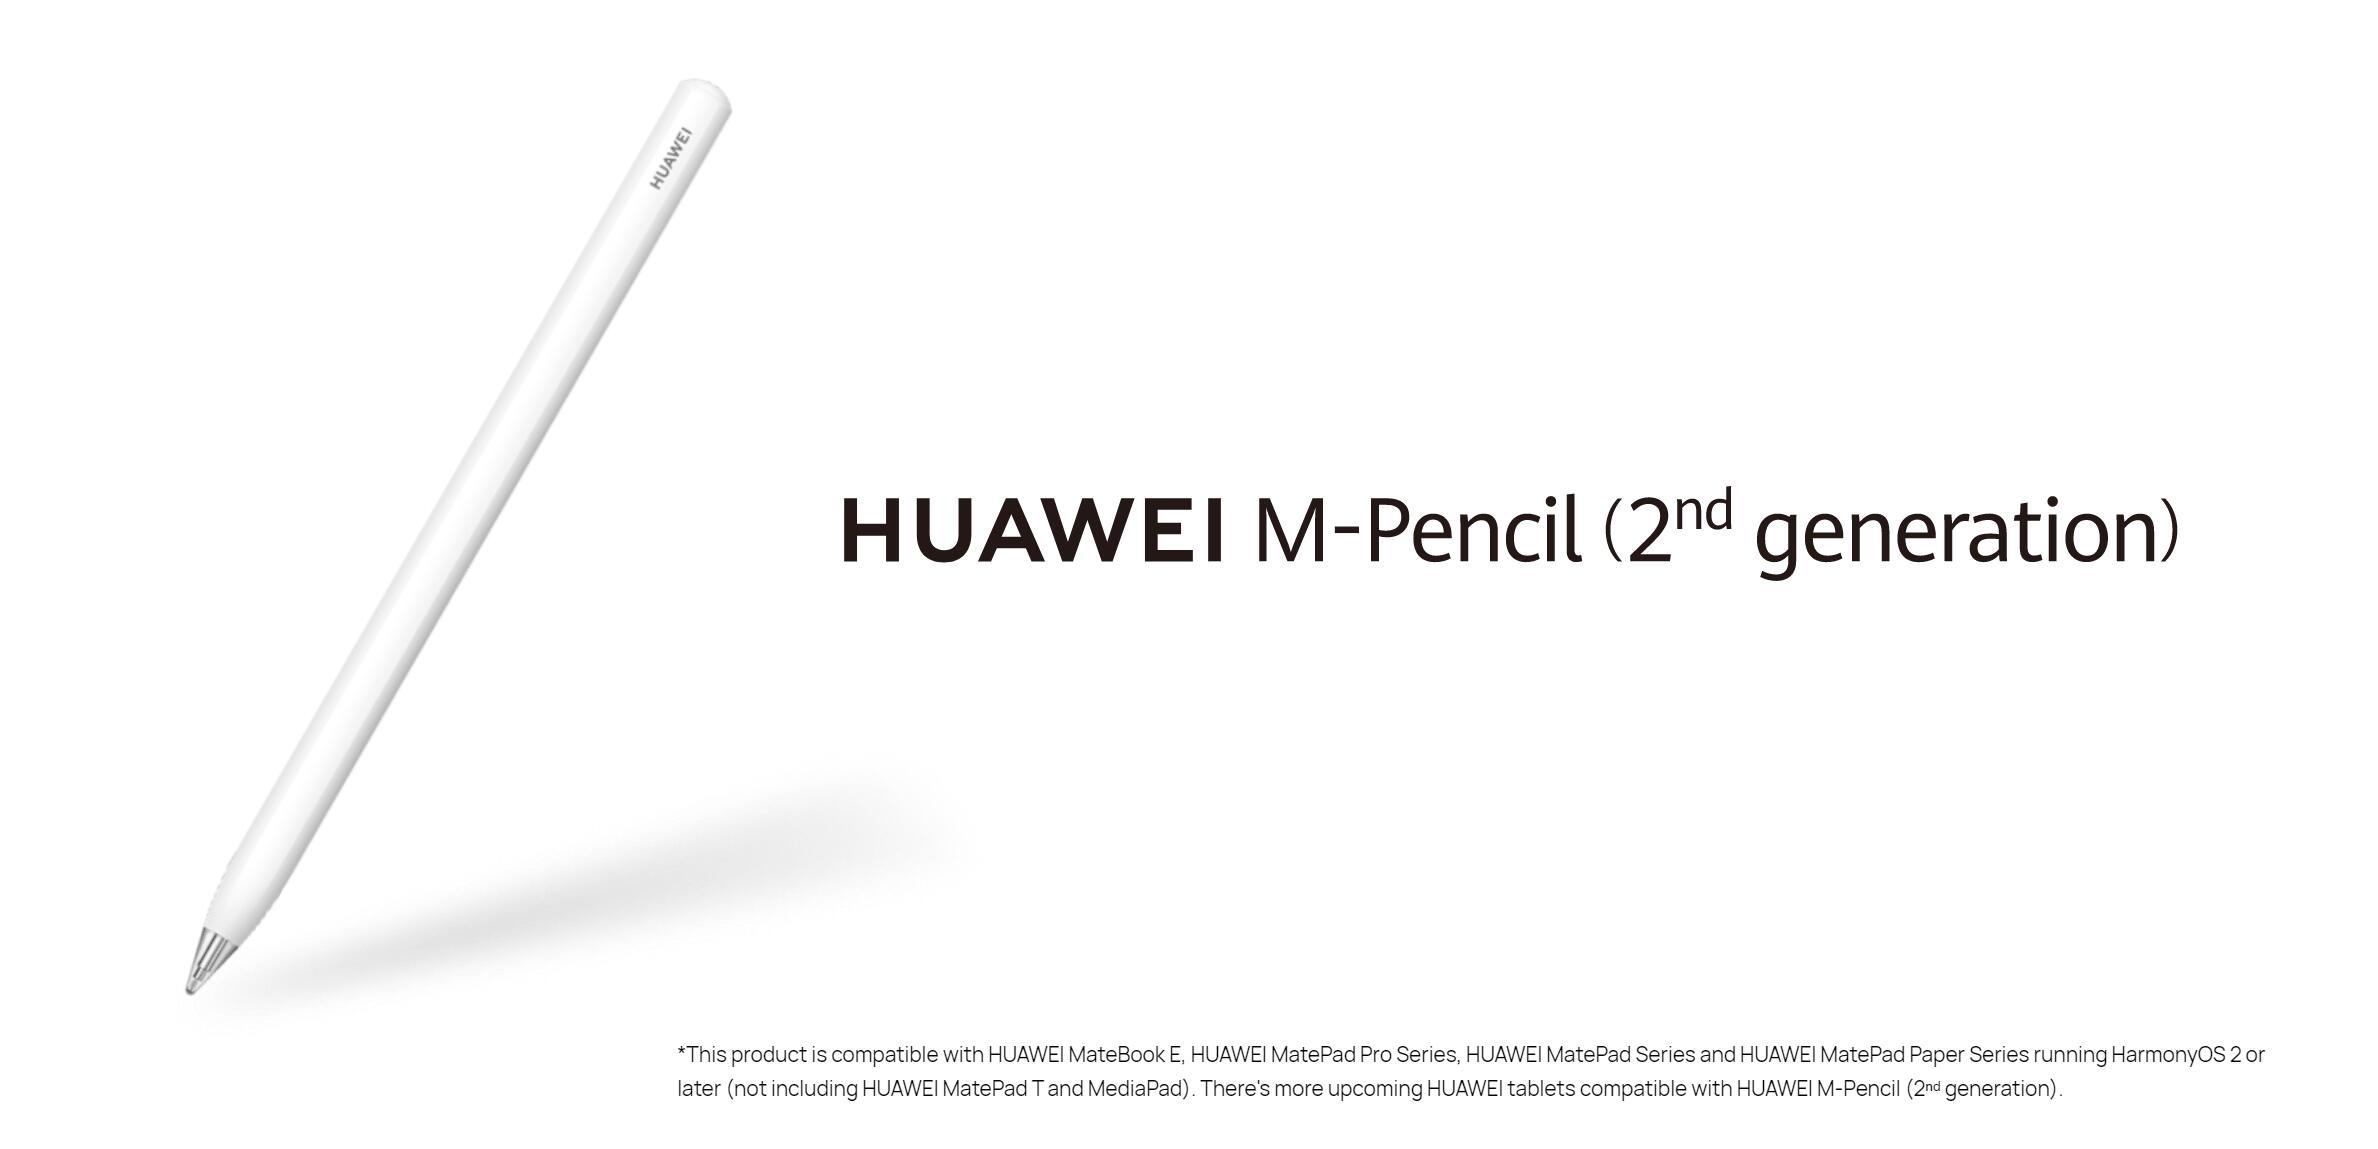 Huawei M-Pencil (2nd Generation) New